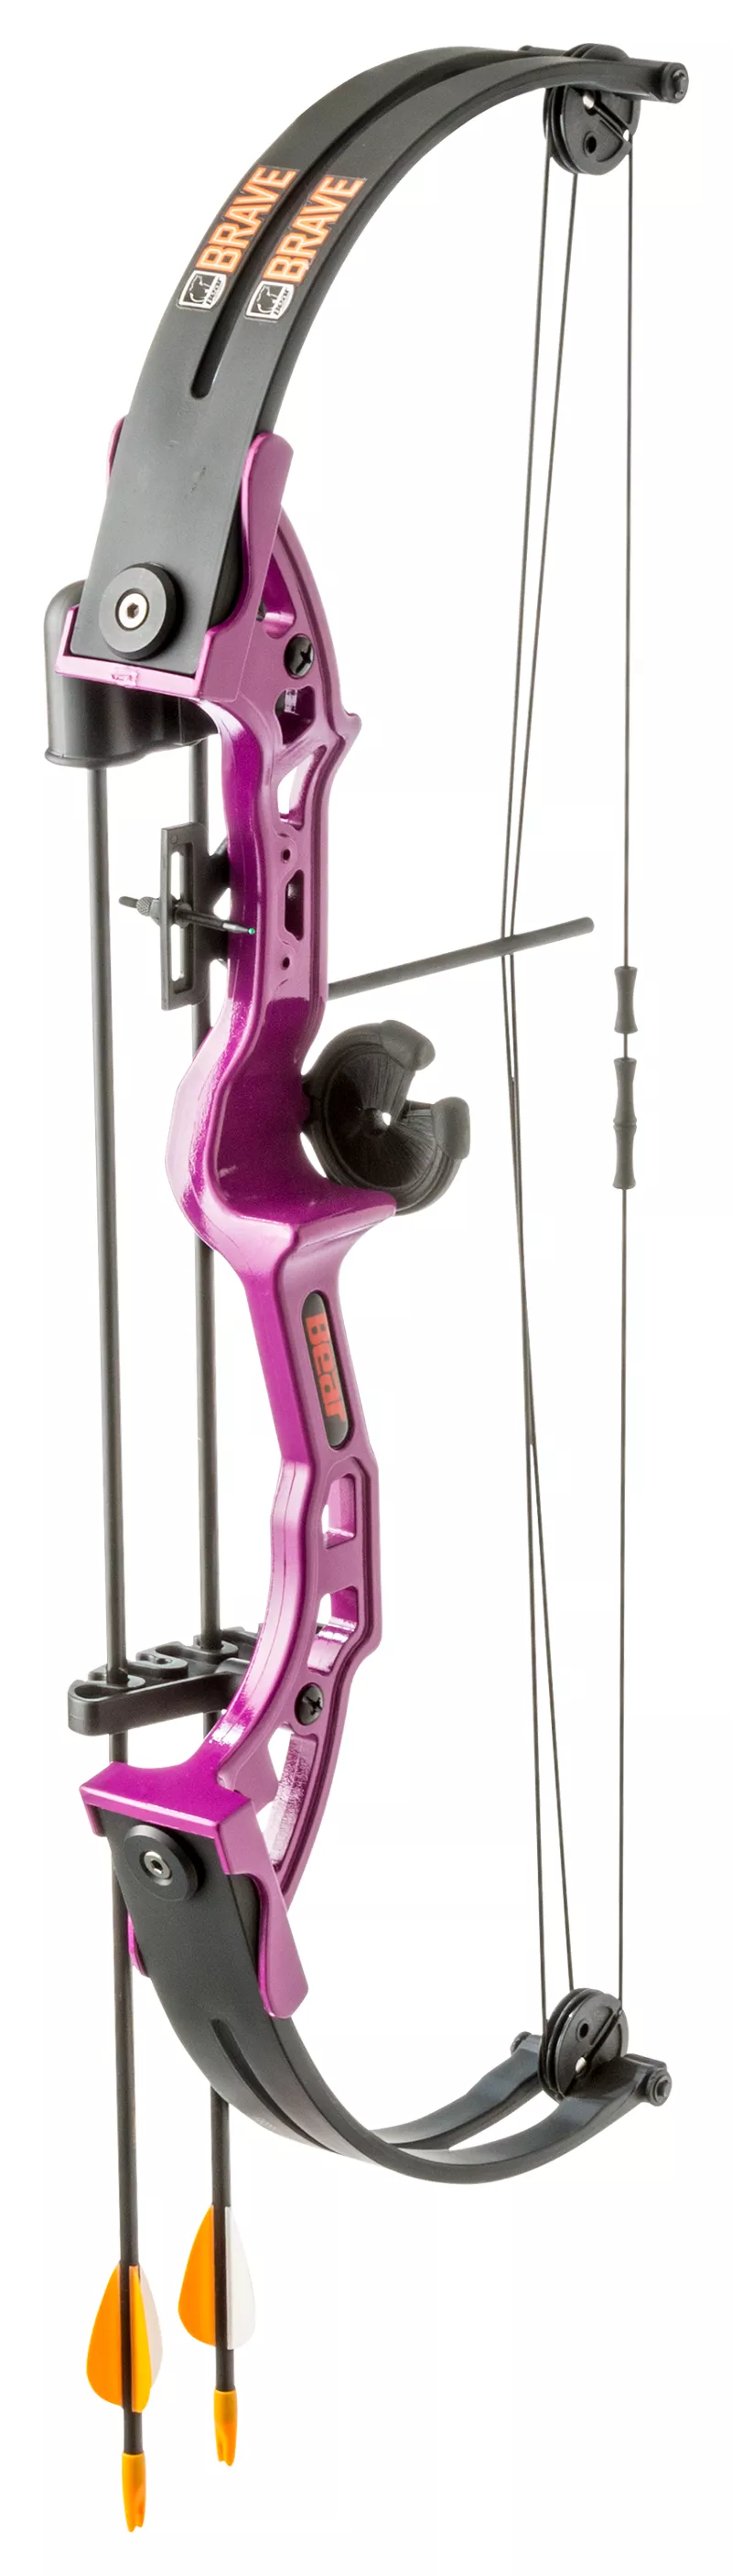 Bear Archery Brave Youth Bow Set - Purple - $49.97 (Free S/H over $50)